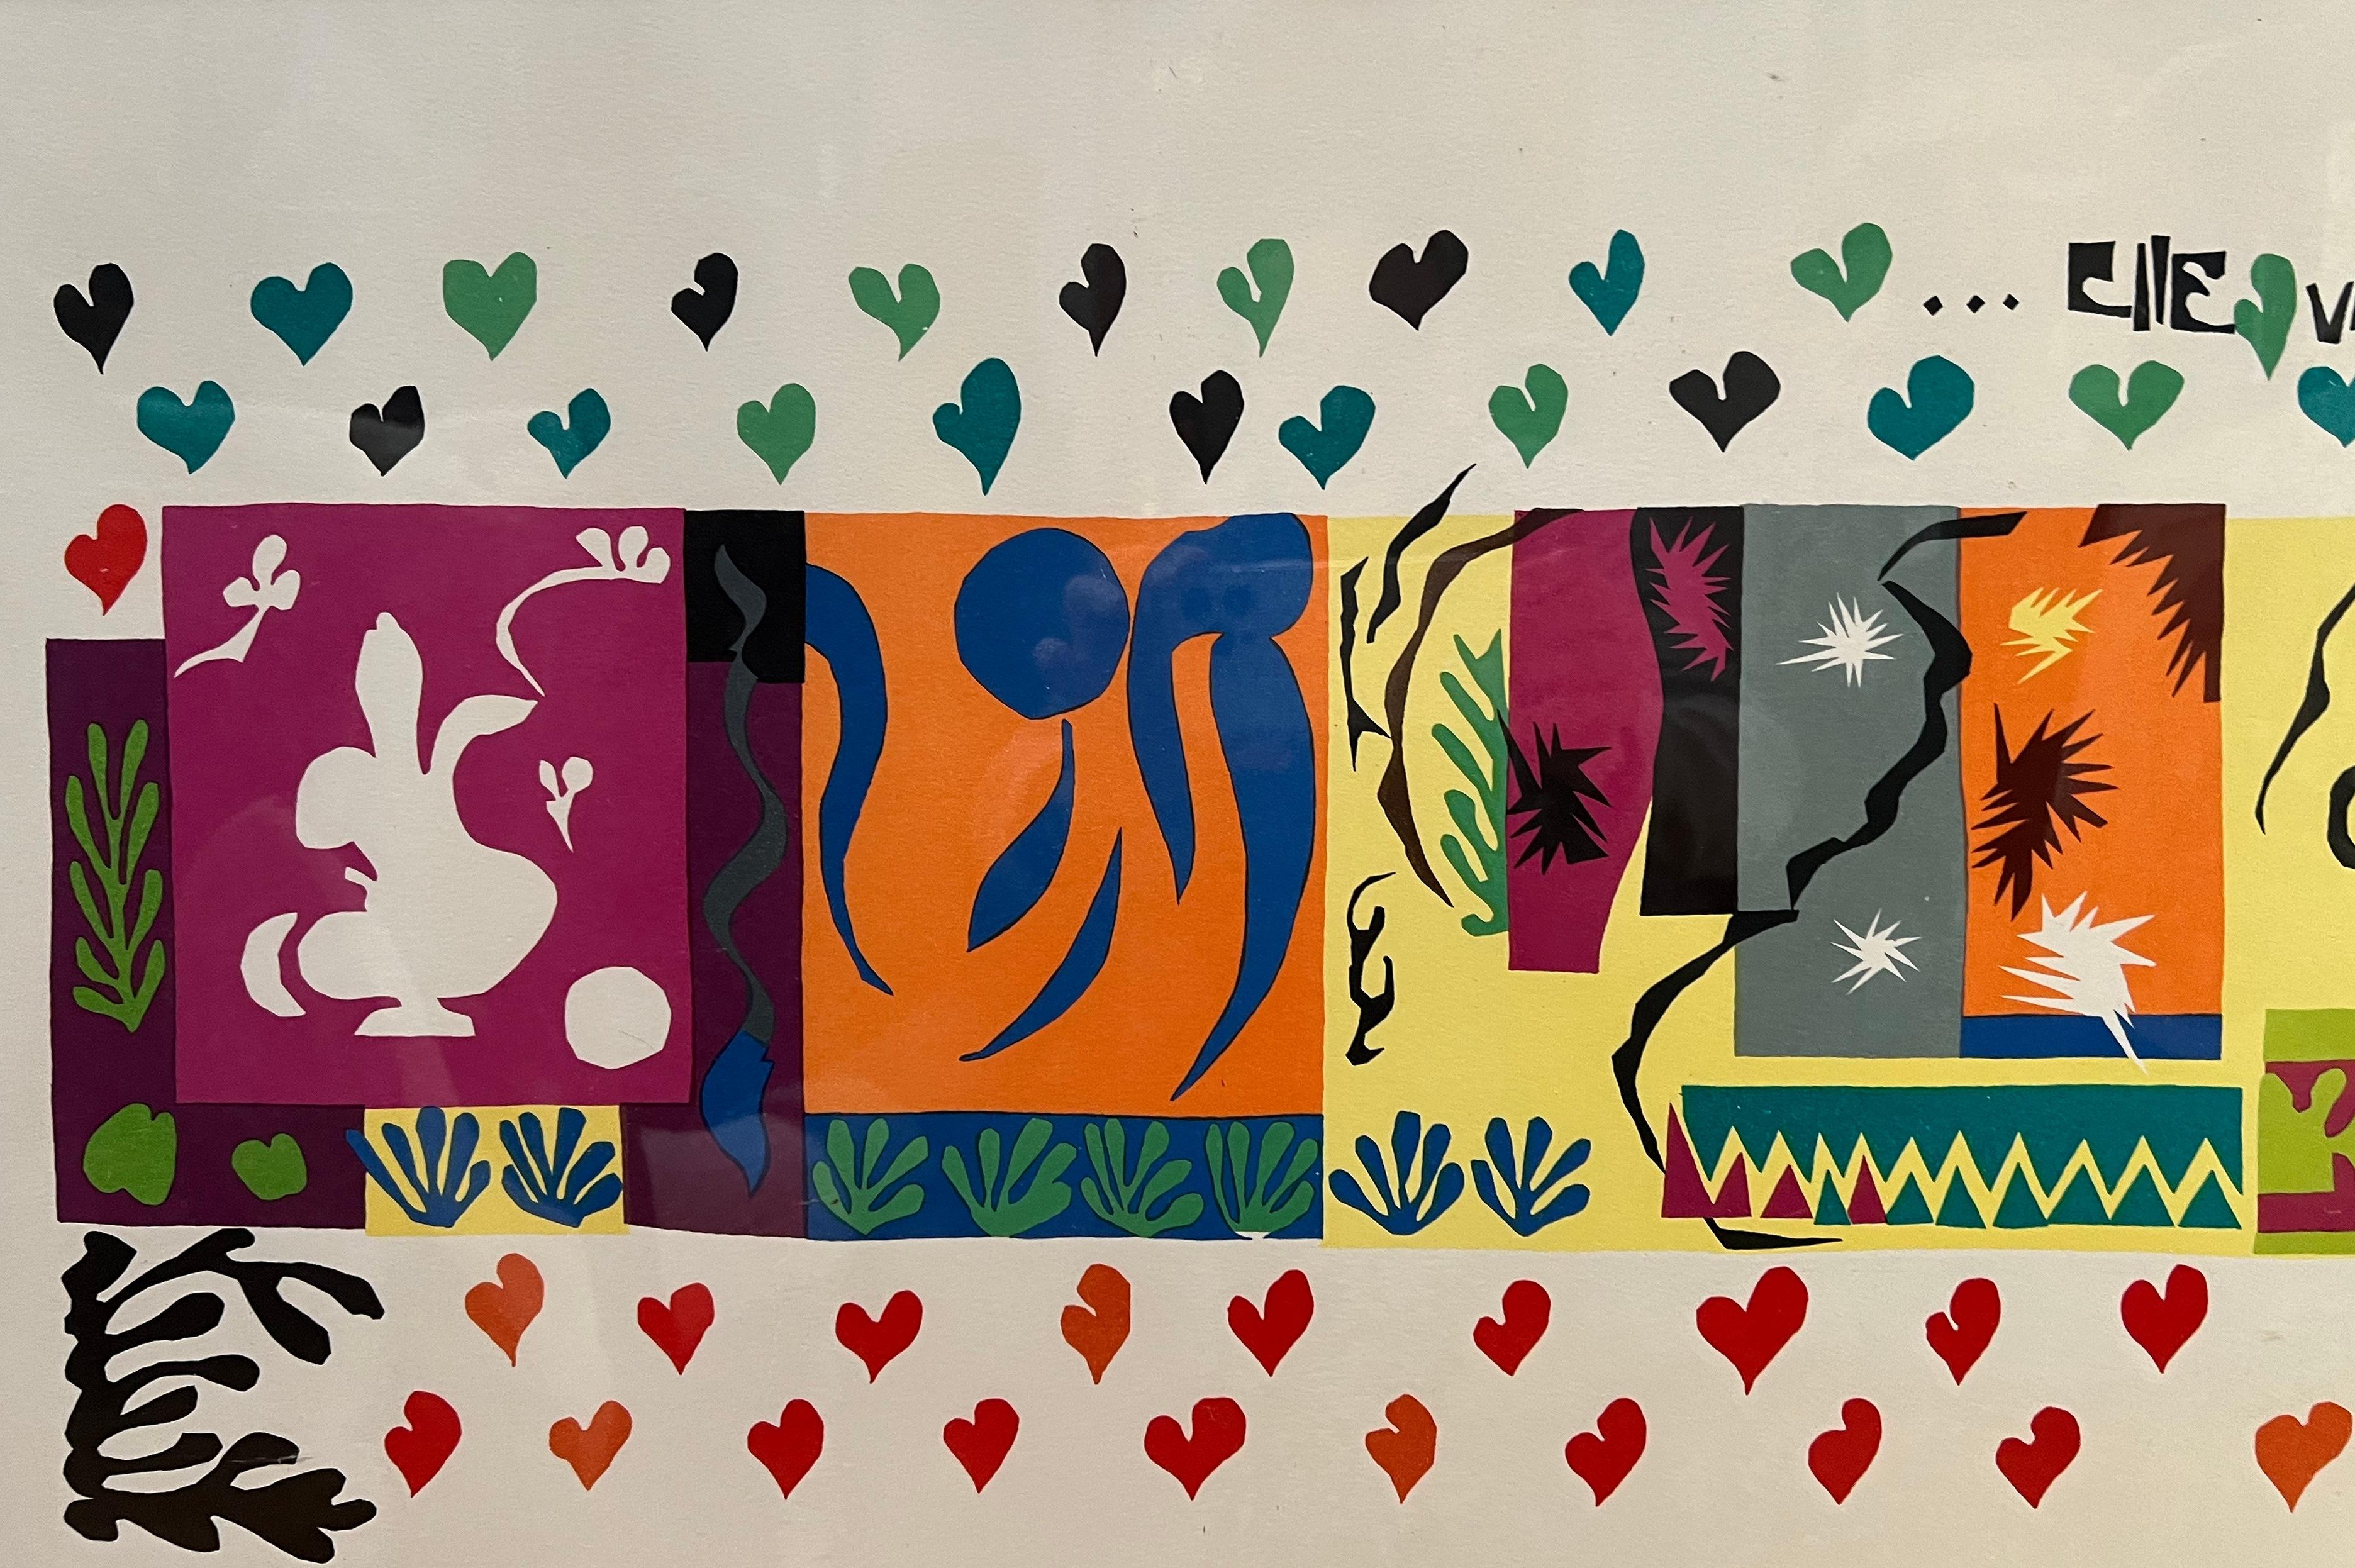 Here is a beautiful lithograph by one of the most famous artists of the 20th century, Henri Matisse. The gorgeous, signed print entitled 